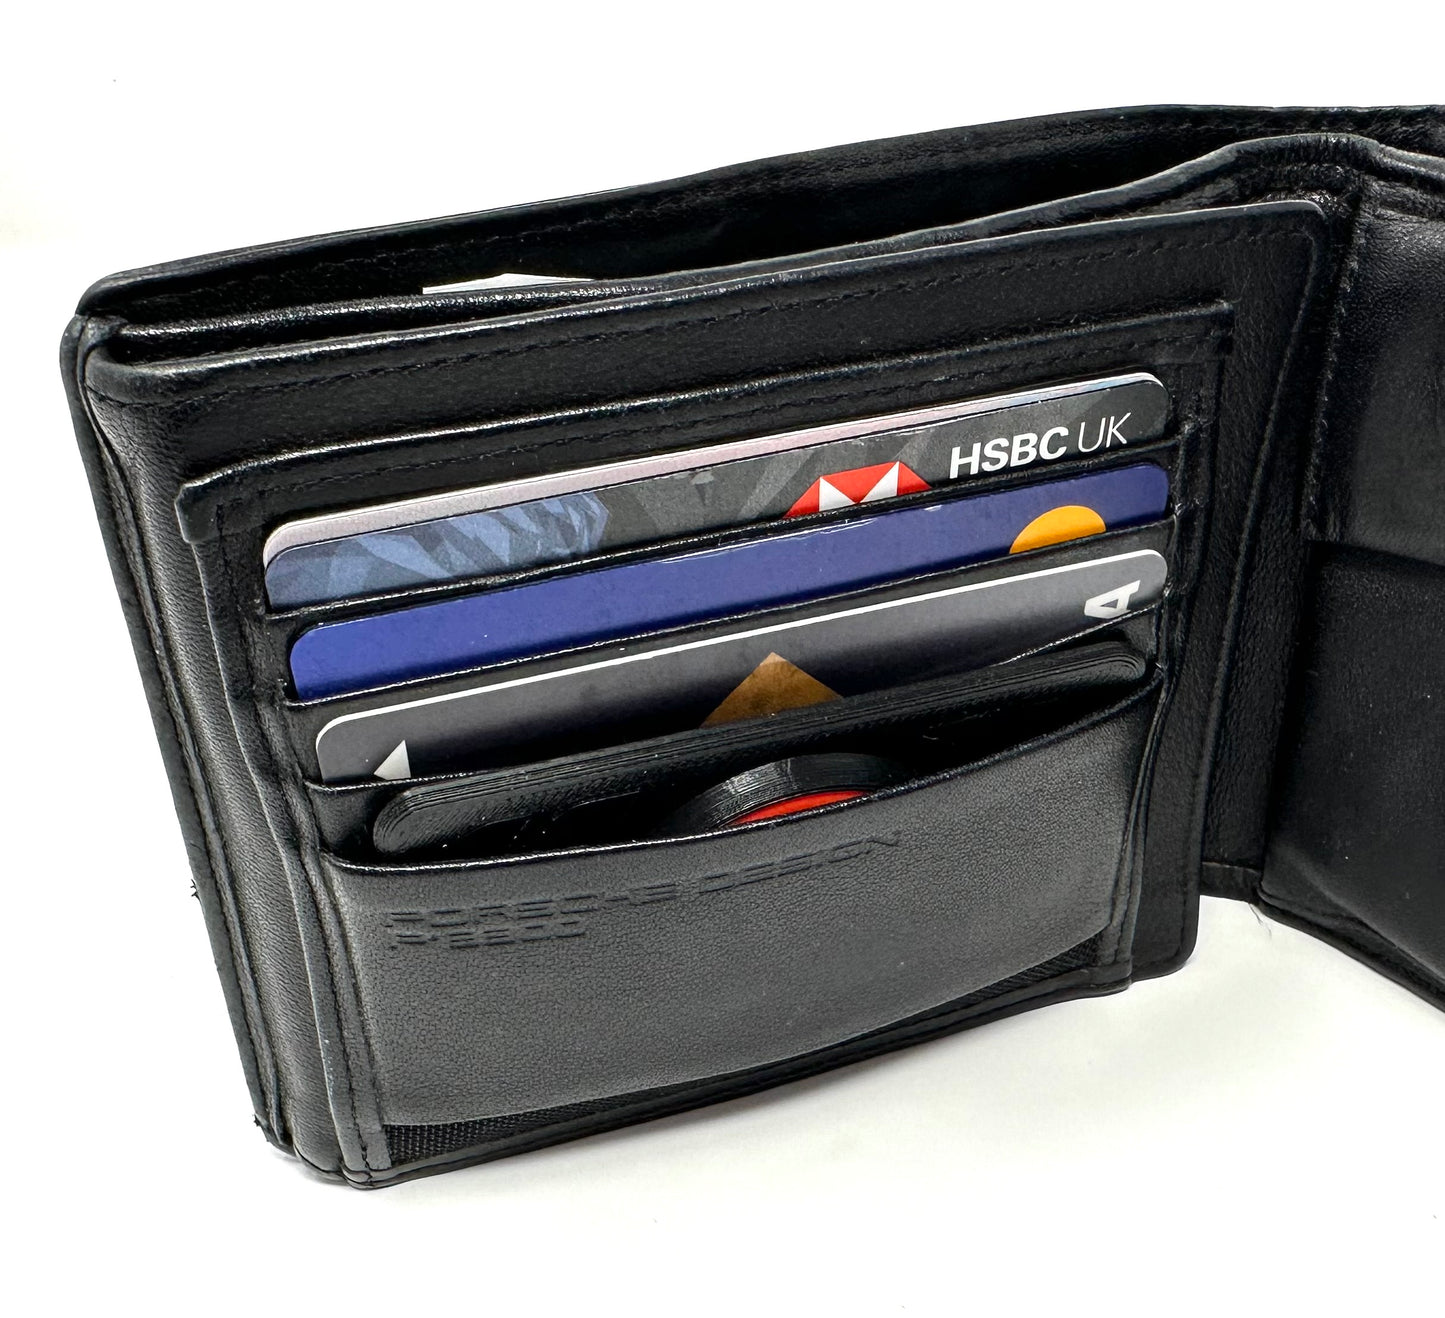 Chipolo One Credit Card Sized Wallet/Purse/Clutch Bag Holder